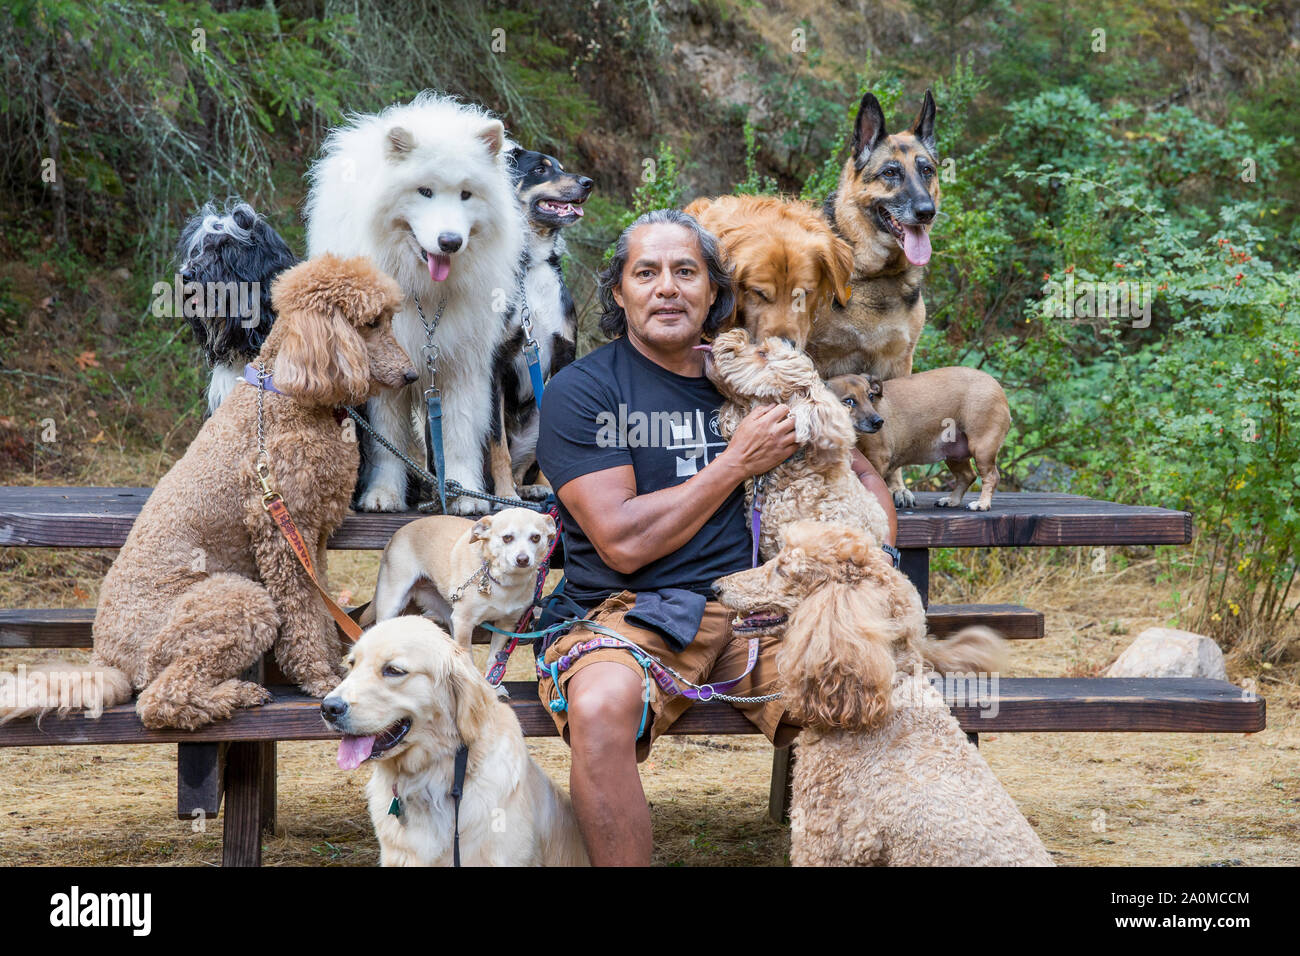 During a break, professional dog walker and trainer Juan Carlos Zuniga surrounded by dogs on a park bench. Stock Photo